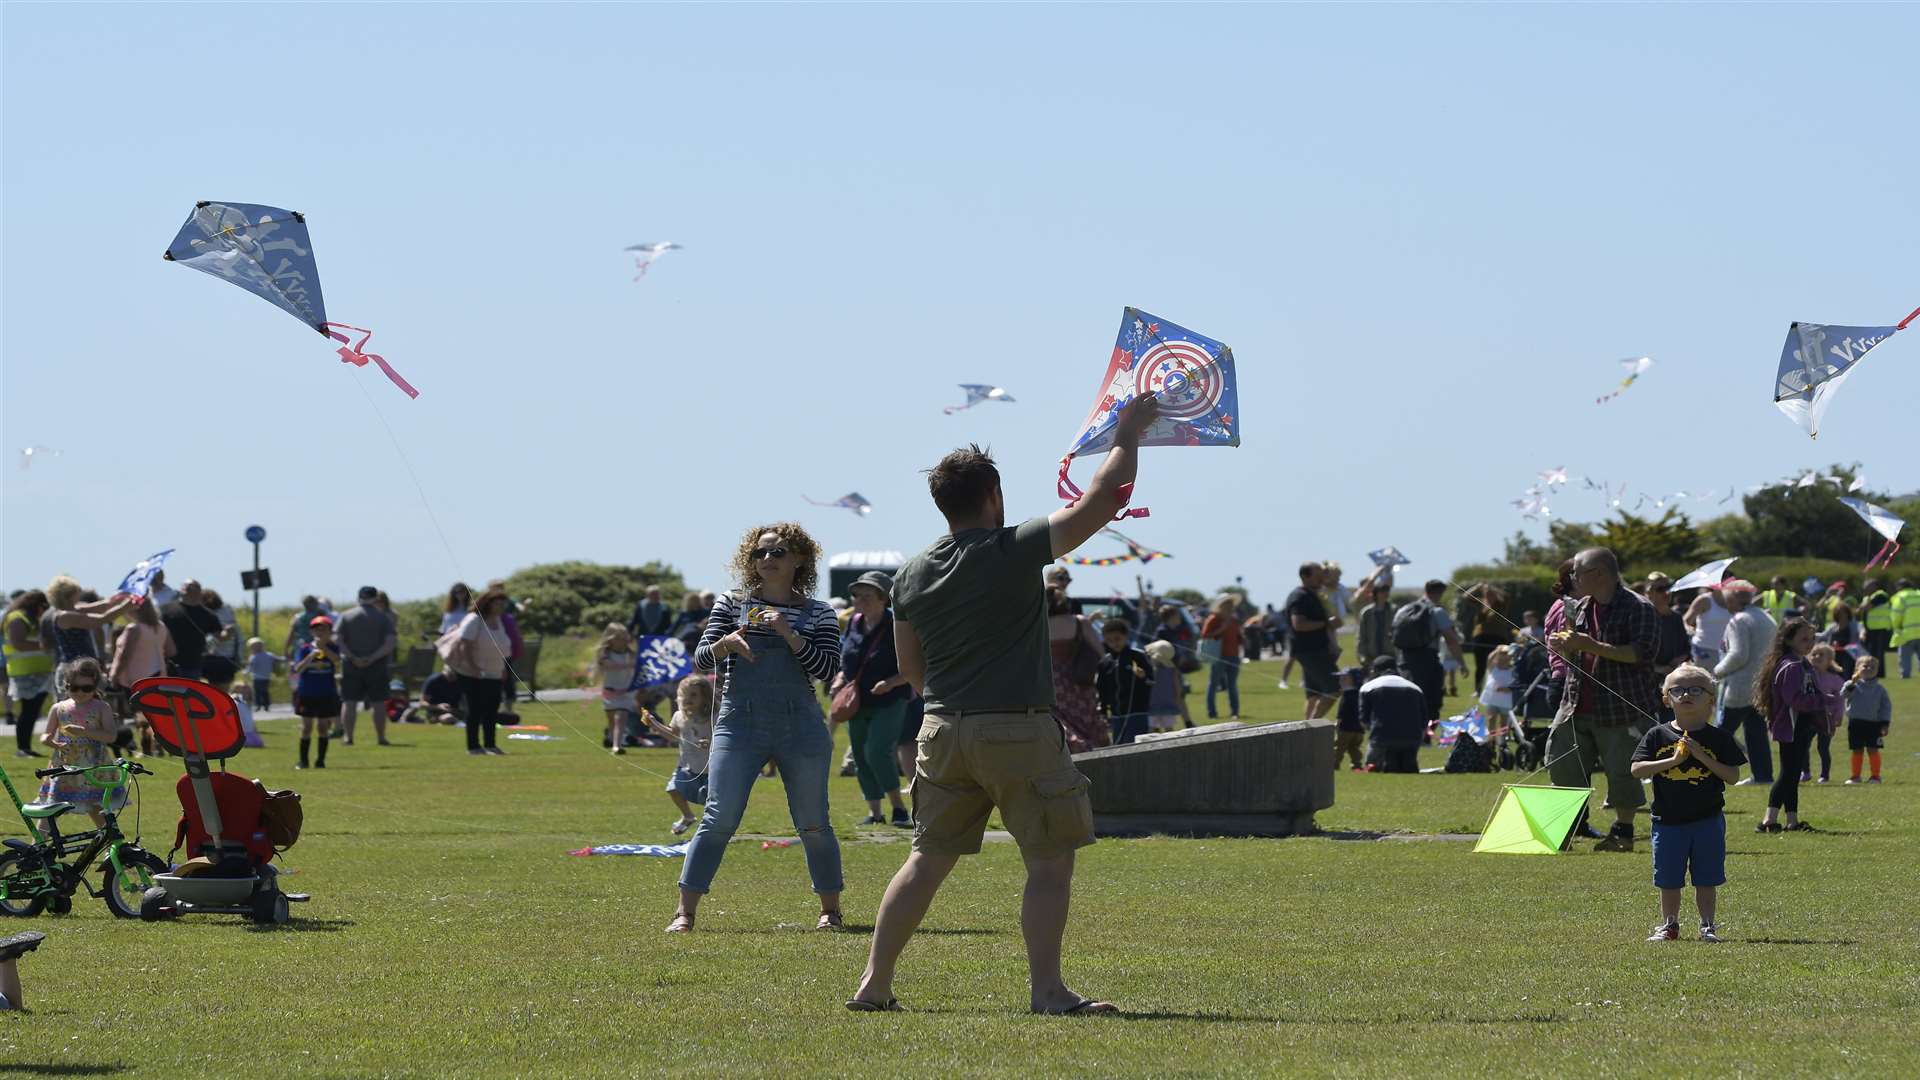 Kent Kite Fliers bring kites of all shapes and sizes to Walmer Green